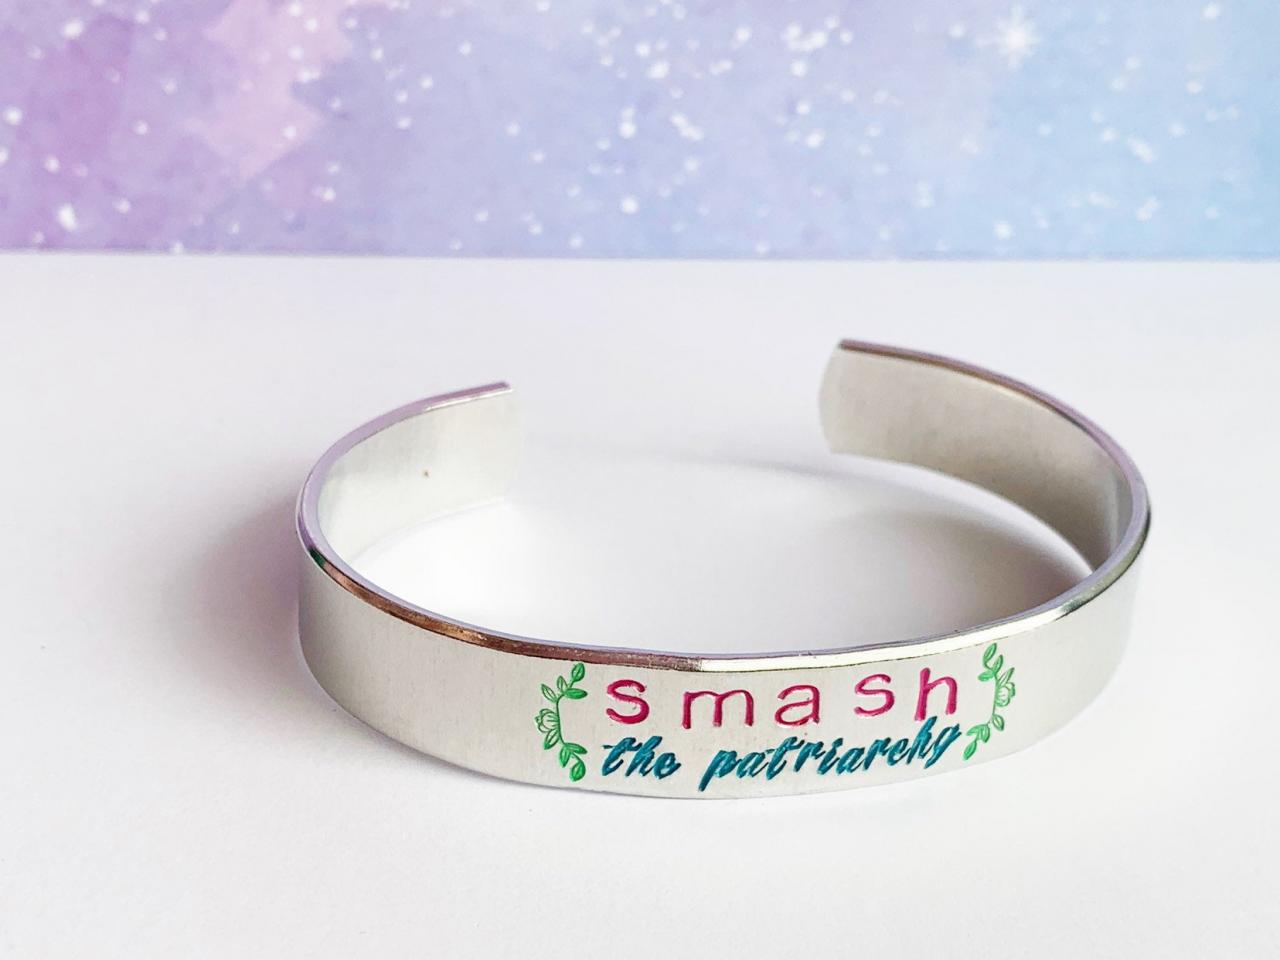 Color Smash The Patriarchy Quote Aluminum Metal Stamped Cuff Bracelet 1/2 Inch //feminism